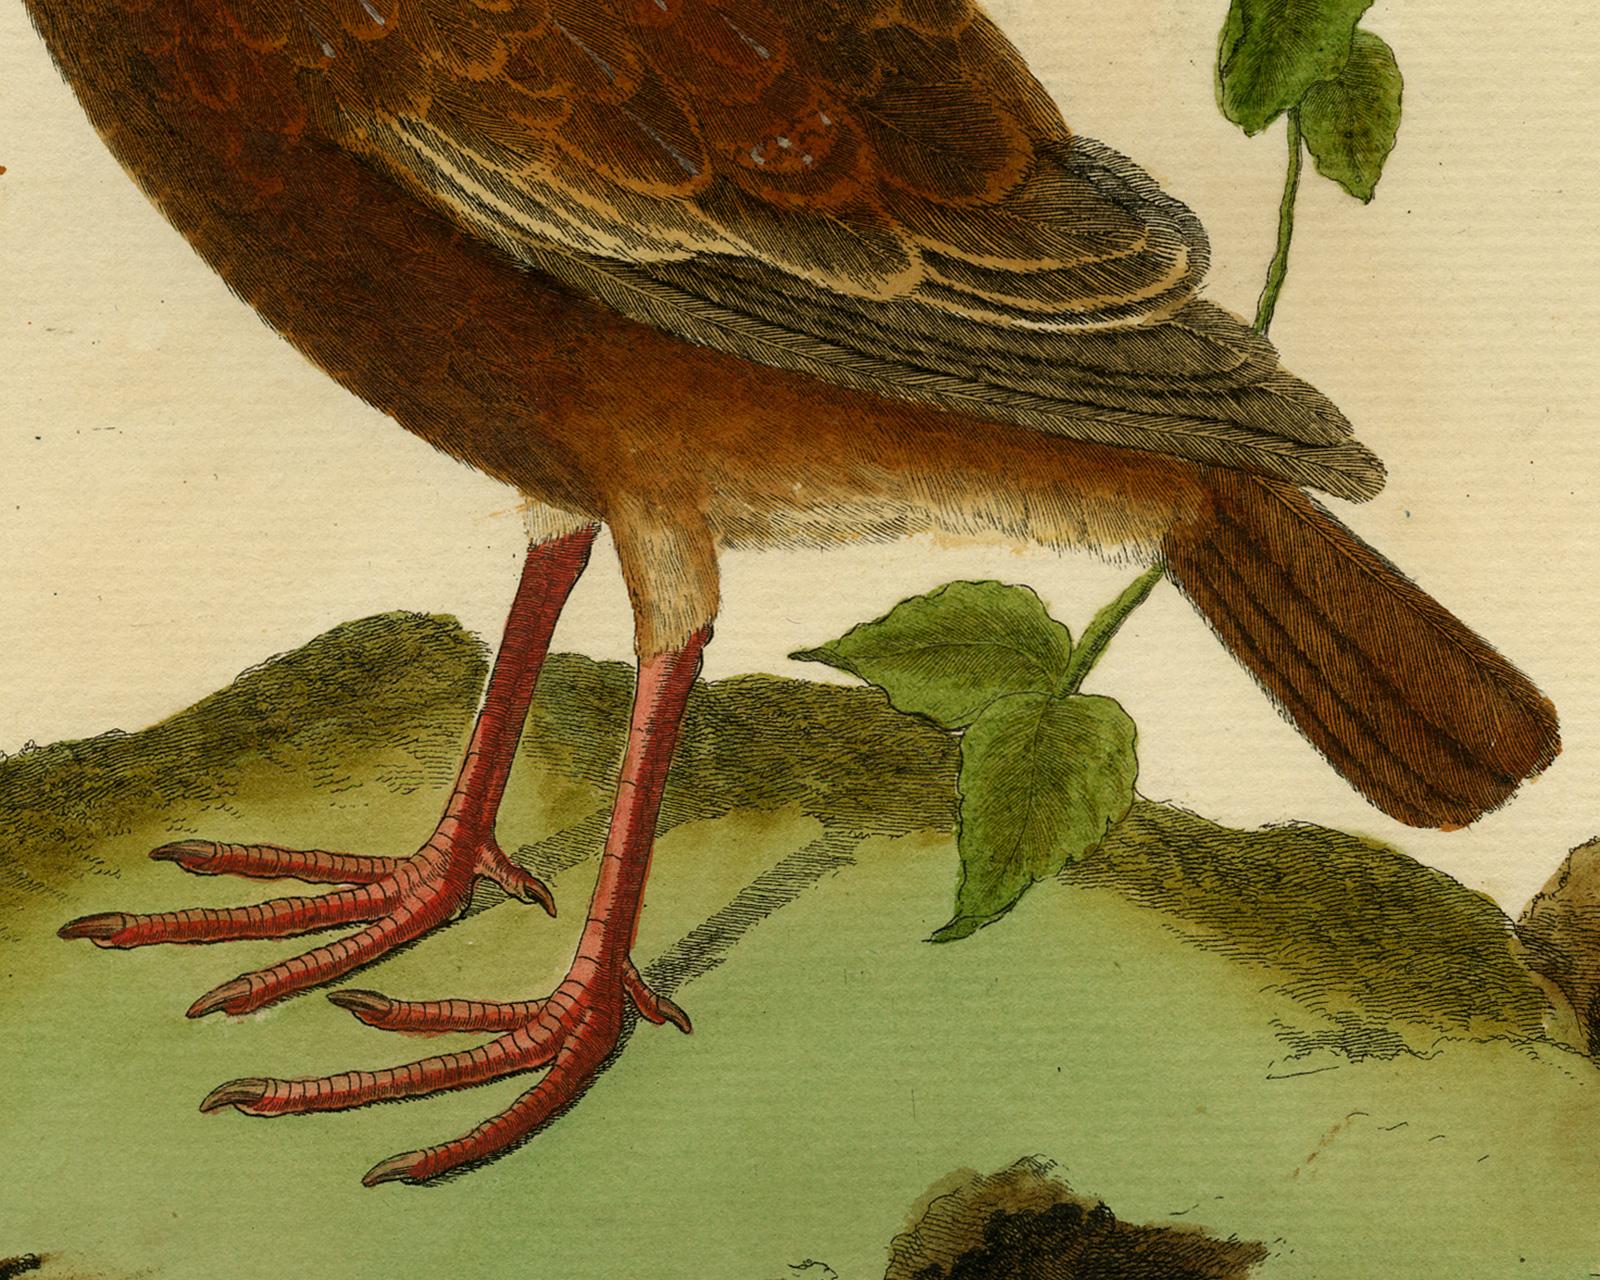 Mountain Partridge by Martinet - Handcoloured engraving - 18th century - Beige Animal Print by Francois Nicolas Martinet